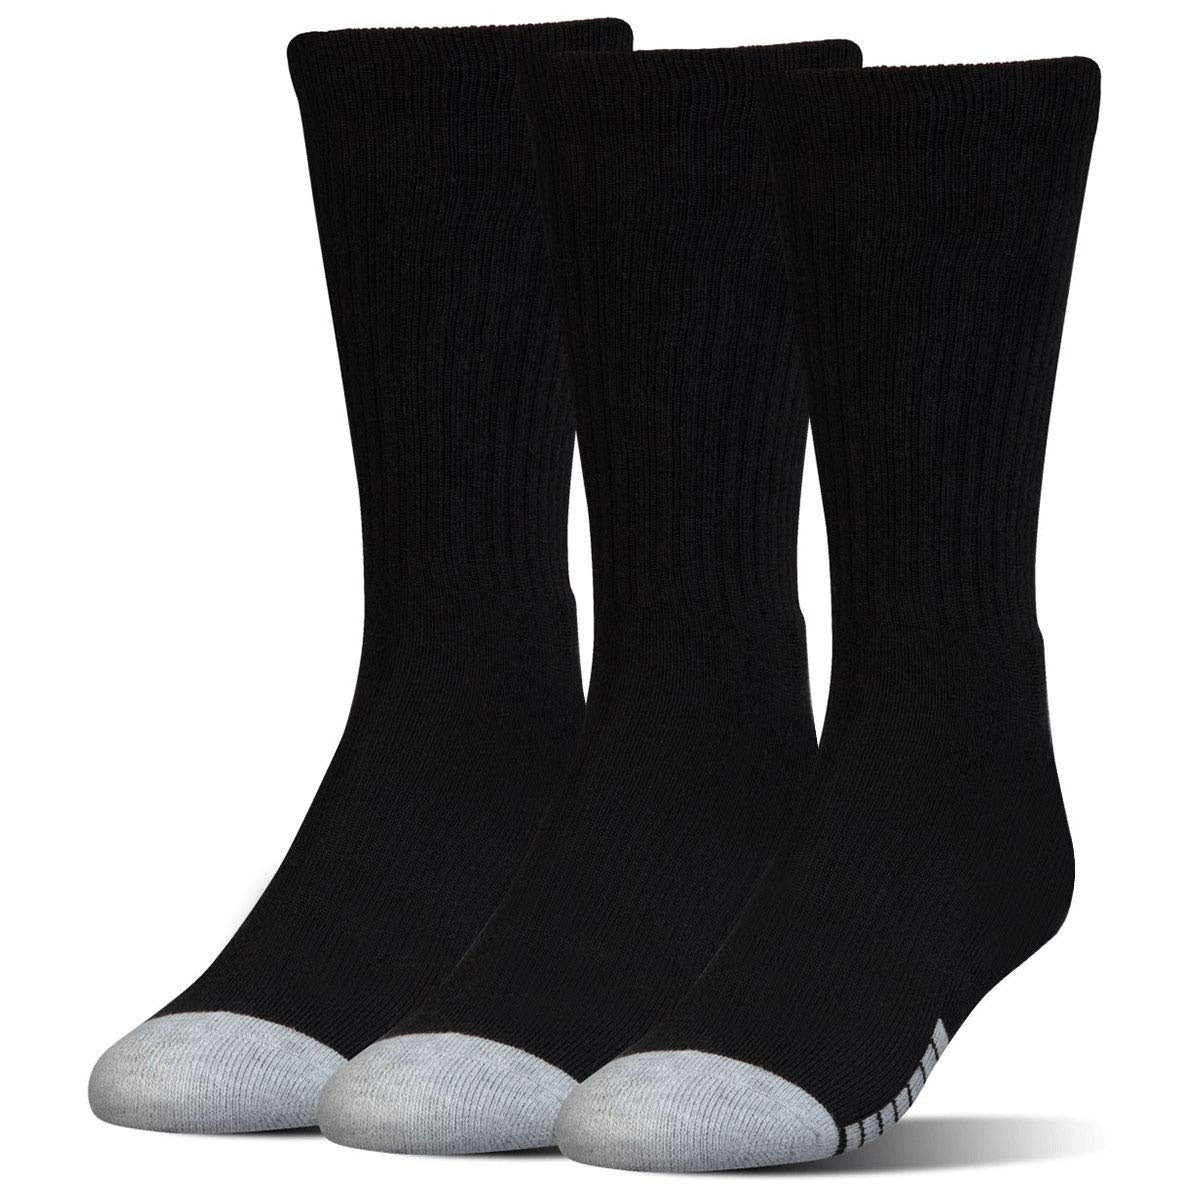 Under Armour Crew Adult Socks (3 Pack)